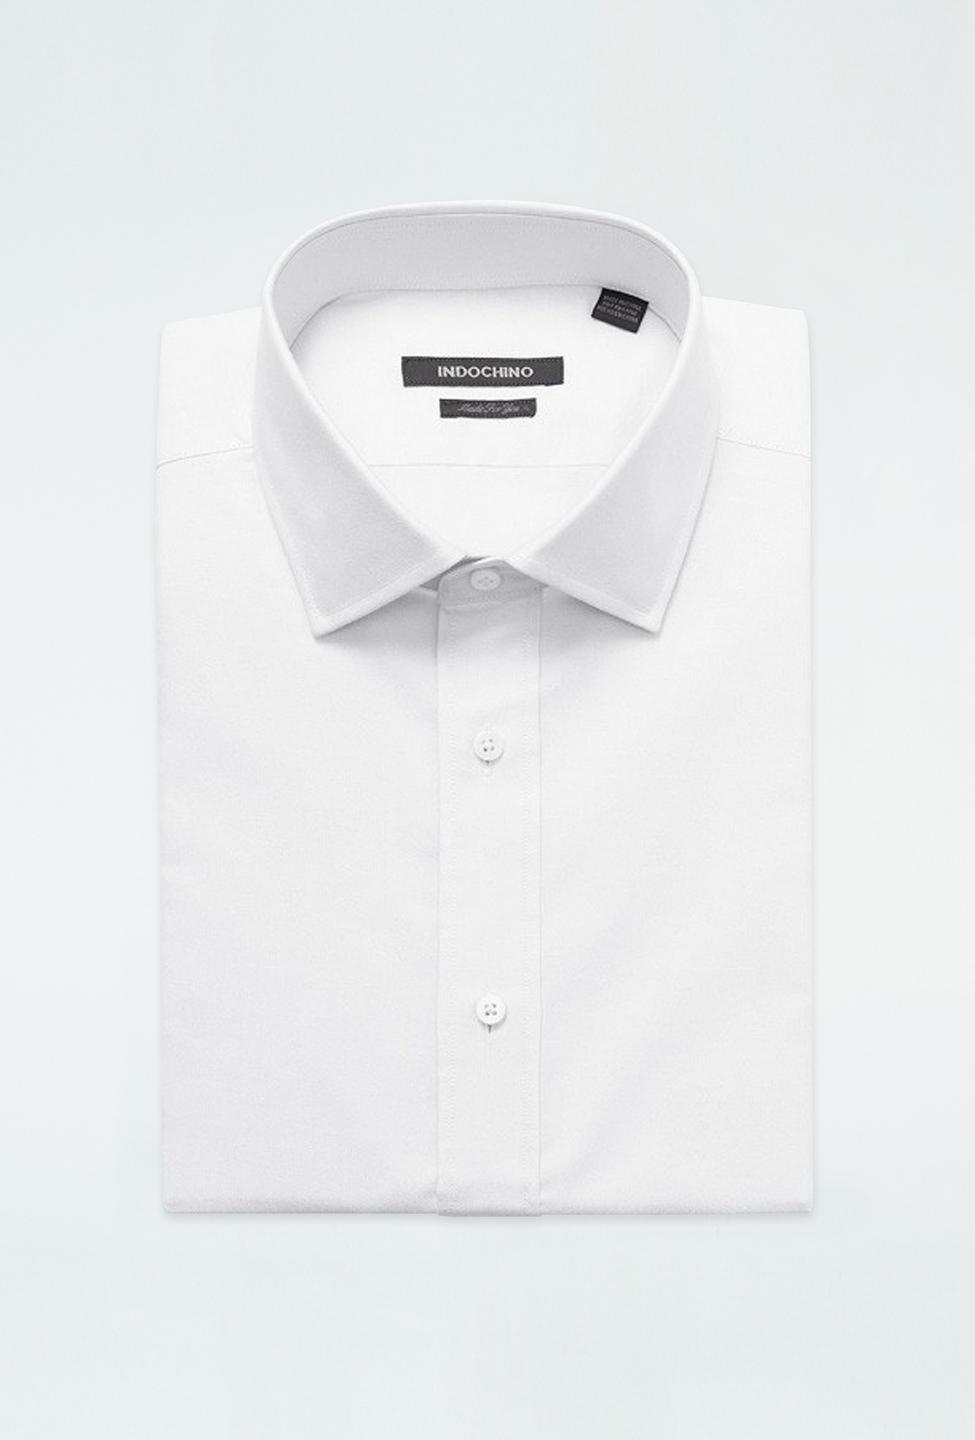 White shirt - Hartland Solid Design from Premium Indochino Collection